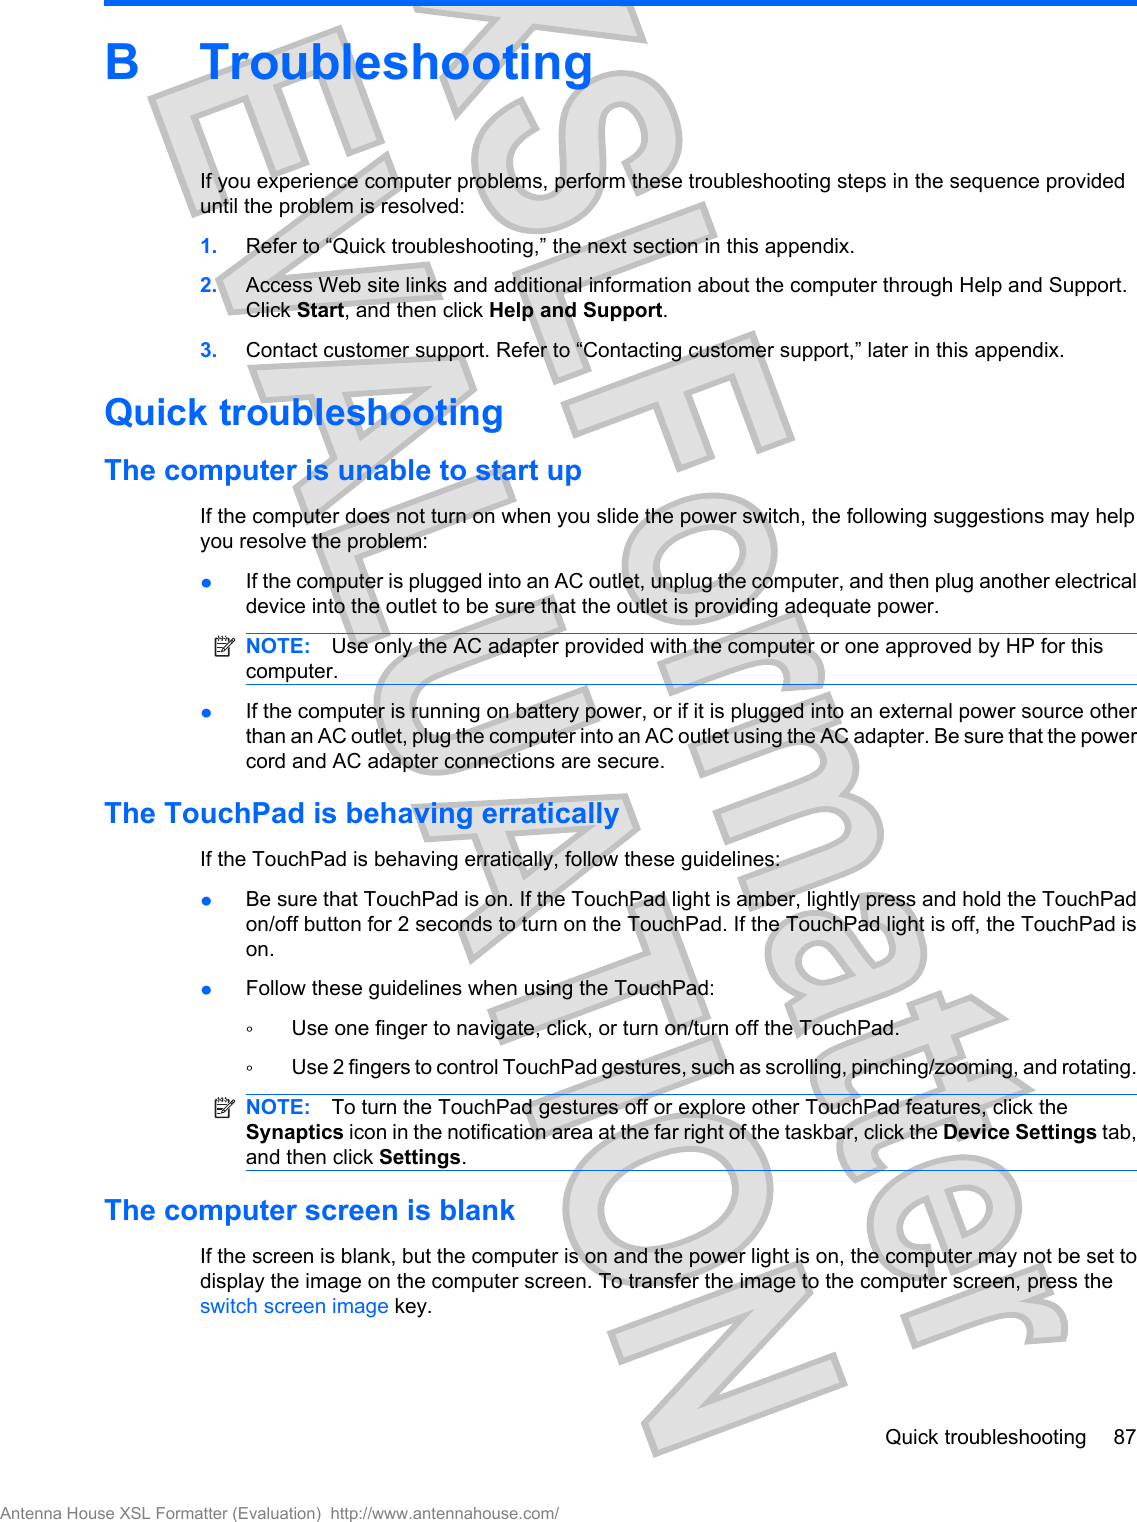 B TroubleshootingIf you experience computer problems, perform these troubleshooting steps in the sequence provideduntil the problem is resolved:1. Refer to “Quick troubleshooting,” the next section in this appendix.2. Access Web site links and additional information about the computer through Help and Support.Click Start, and then click Help and Support.3. Contact customer support. Refer to “Contacting customer support,” later in this appendix.Quick troubleshootingThe computer is unable to start upIf the computer does not turn on when you slide the power switch, the following suggestions may helpyou resolve the problem:łIf the computer is plugged into an AC outlet, unplug the computer, and then plug another electricaldevice into the outlet to be sure that the outlet is providing adequate power.NOTE: Use only the AC adapter provided with the computer or one approved by HP for thiscomputer.łIf the computer is running on battery power, or if it is plugged into an external power source otherthan an AC outlet, plug the computer into an AC outlet using the AC adapter. Be sure that the powercord and AC adapter connections are secure.The TouchPad is behaving erraticallyIf the TouchPad is behaving erratically, follow these guidelines:łBe sure that TouchPad is on. If the TouchPad light is amber, lightly press and hold the TouchPadon/off button for 2 seconds to turn on the TouchPad. If the TouchPad light is off, the TouchPad ison.łFollow these guidelines when using the TouchPad:ŃUse one finger to navigate, click, or turn on/turn off the TouchPad.ŃUse 2 fingers to control TouchPad gestures, such as scrolling, pinching/zooming, and rotating.NOTE: To turn the TouchPad gestures off or explore other TouchPad features, click theSynaptics icon in the notification area at the far right of the taskbar, click the Device Settings tab,and then click Settings.The computer screen is blankIf the screen is blank, but the computer is on and the power light is on, the computer may not be set todisplay the image on the computer screen. To transfer the image to the computer screen, press theswitch screen image key.Quick troubleshooting 87Antenna House XSL Formatter (Evaluation)  http://www.antennahouse.com/